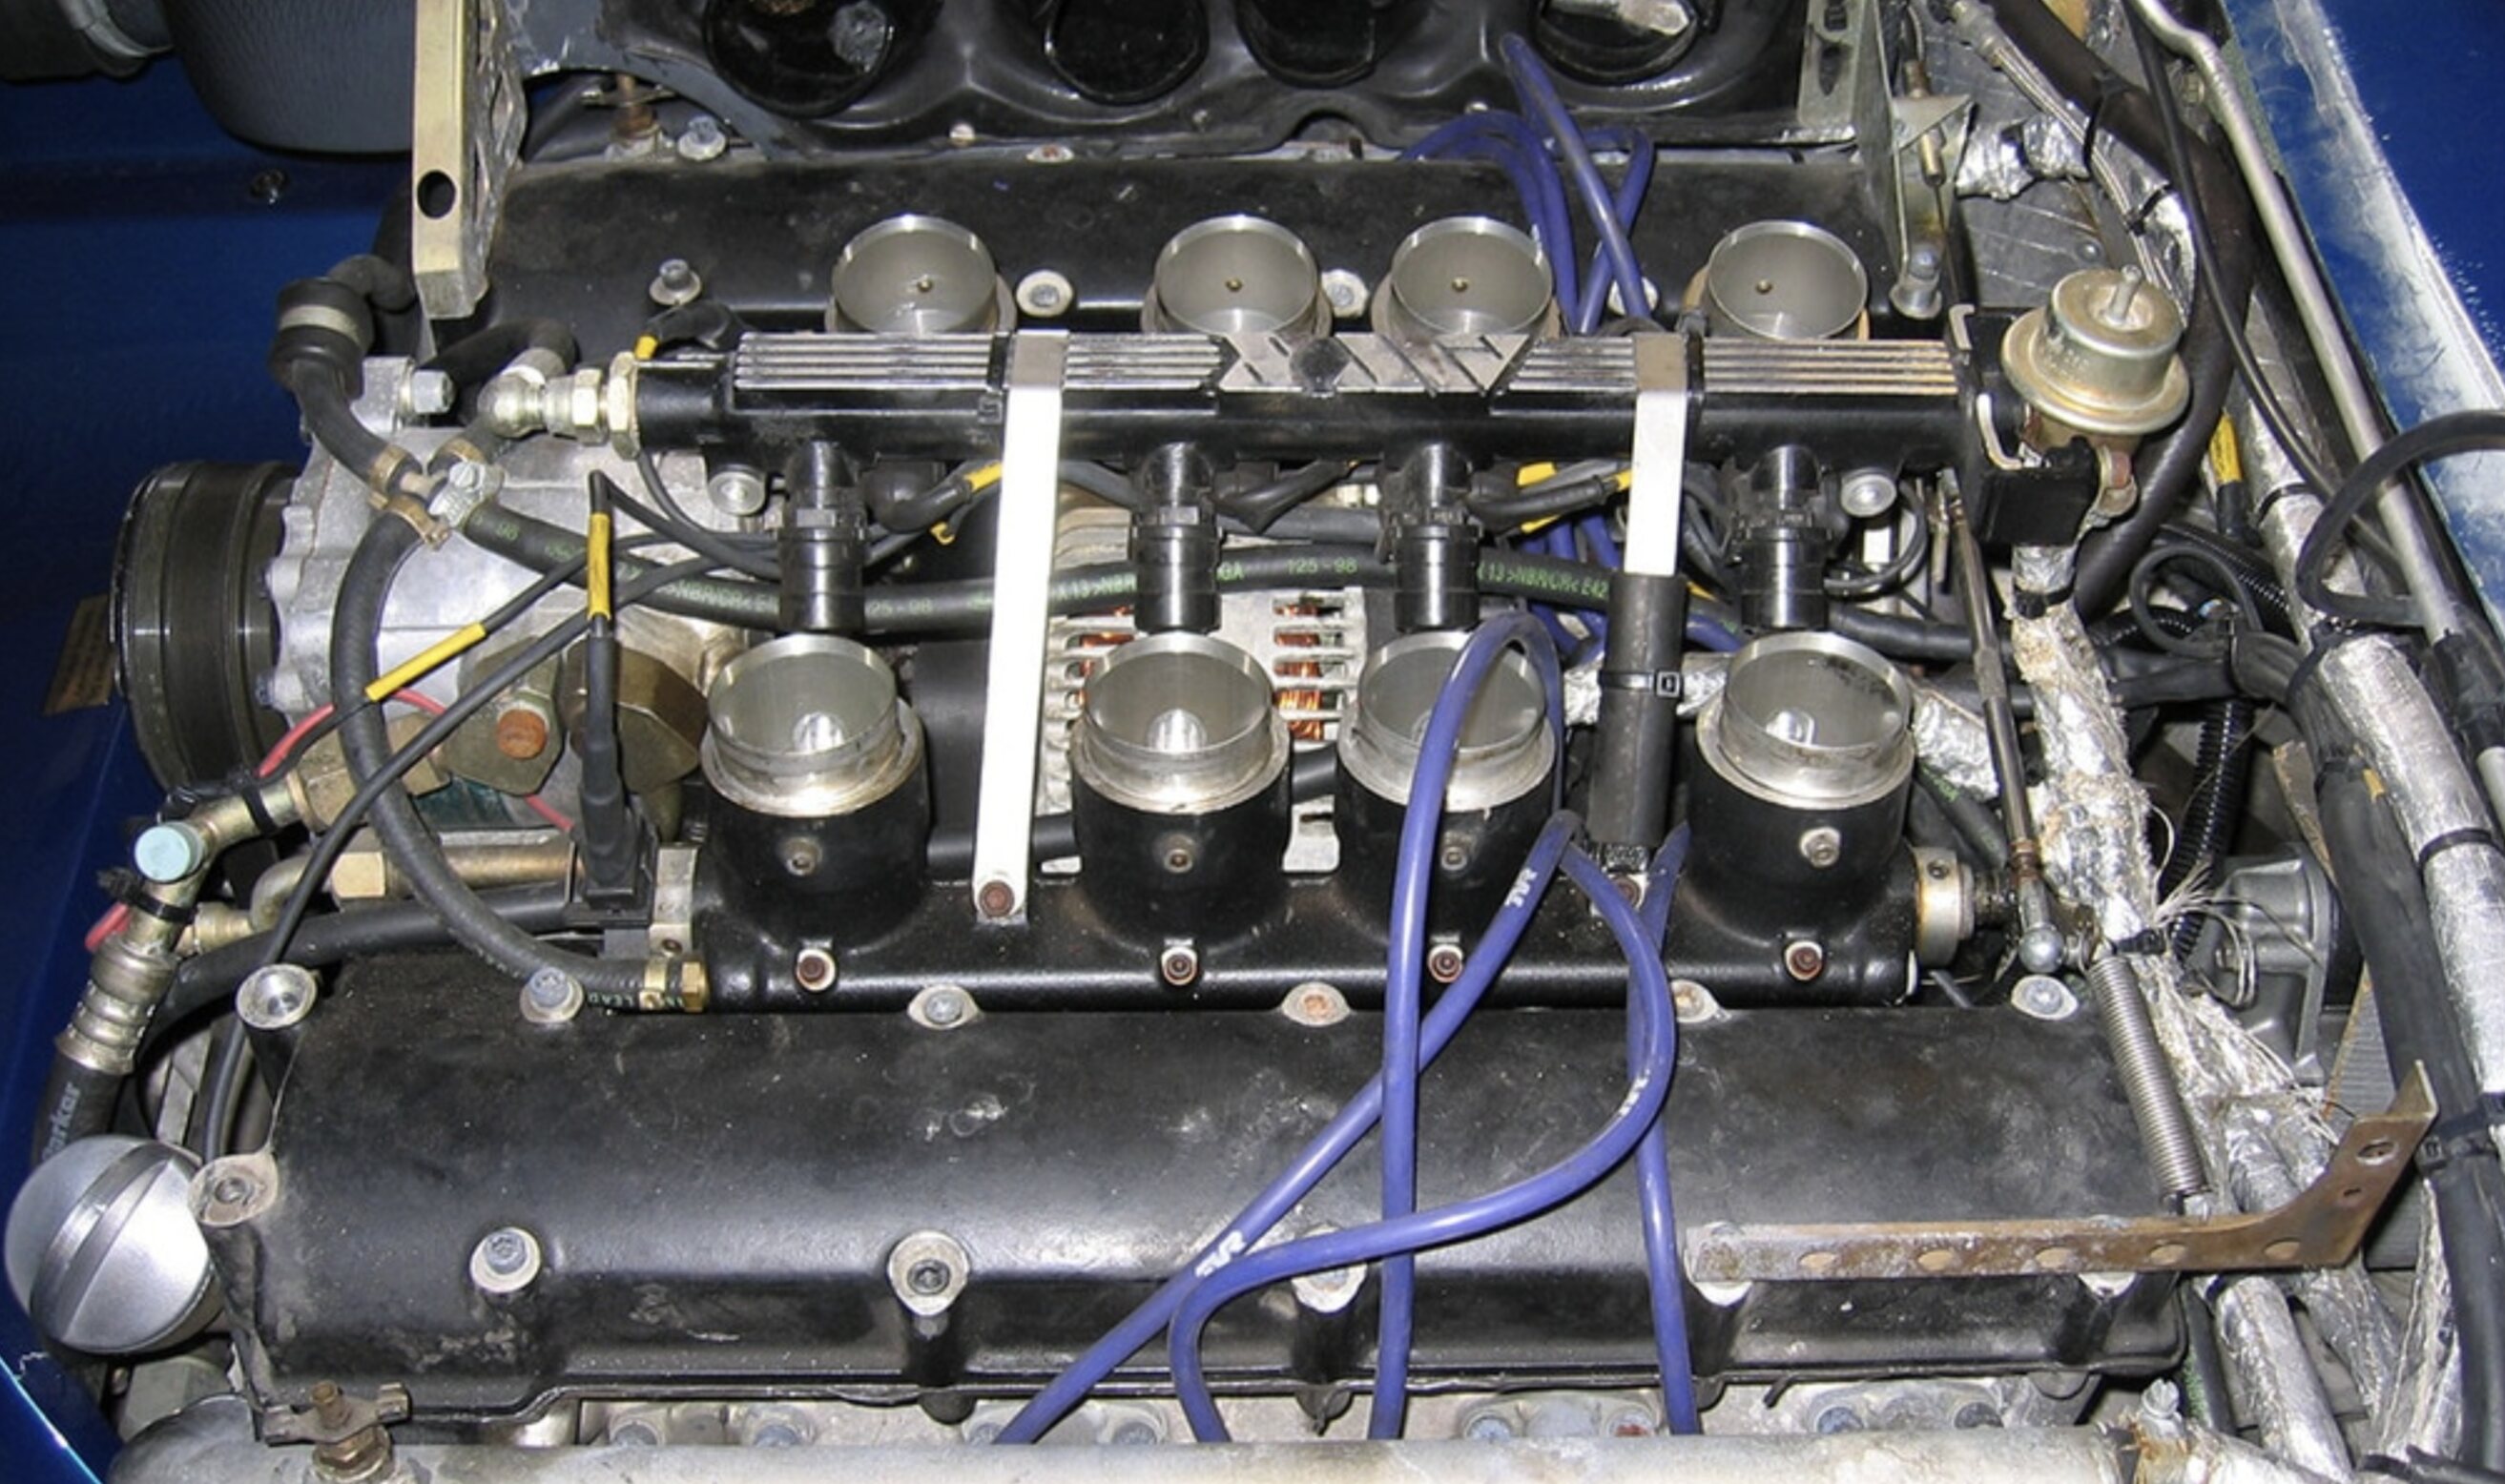 Pistonheads - The image shows an engine inside a vehicle, which appears to be disassembled or in the process of being repaired. There are various components visible, such as gears and metal parts. The engine is set against a darker background, possibly indicating that the photo was taken during maintenance or inspection. This kind of work could involve cleaning, repairing, or replacing parts within the engine.